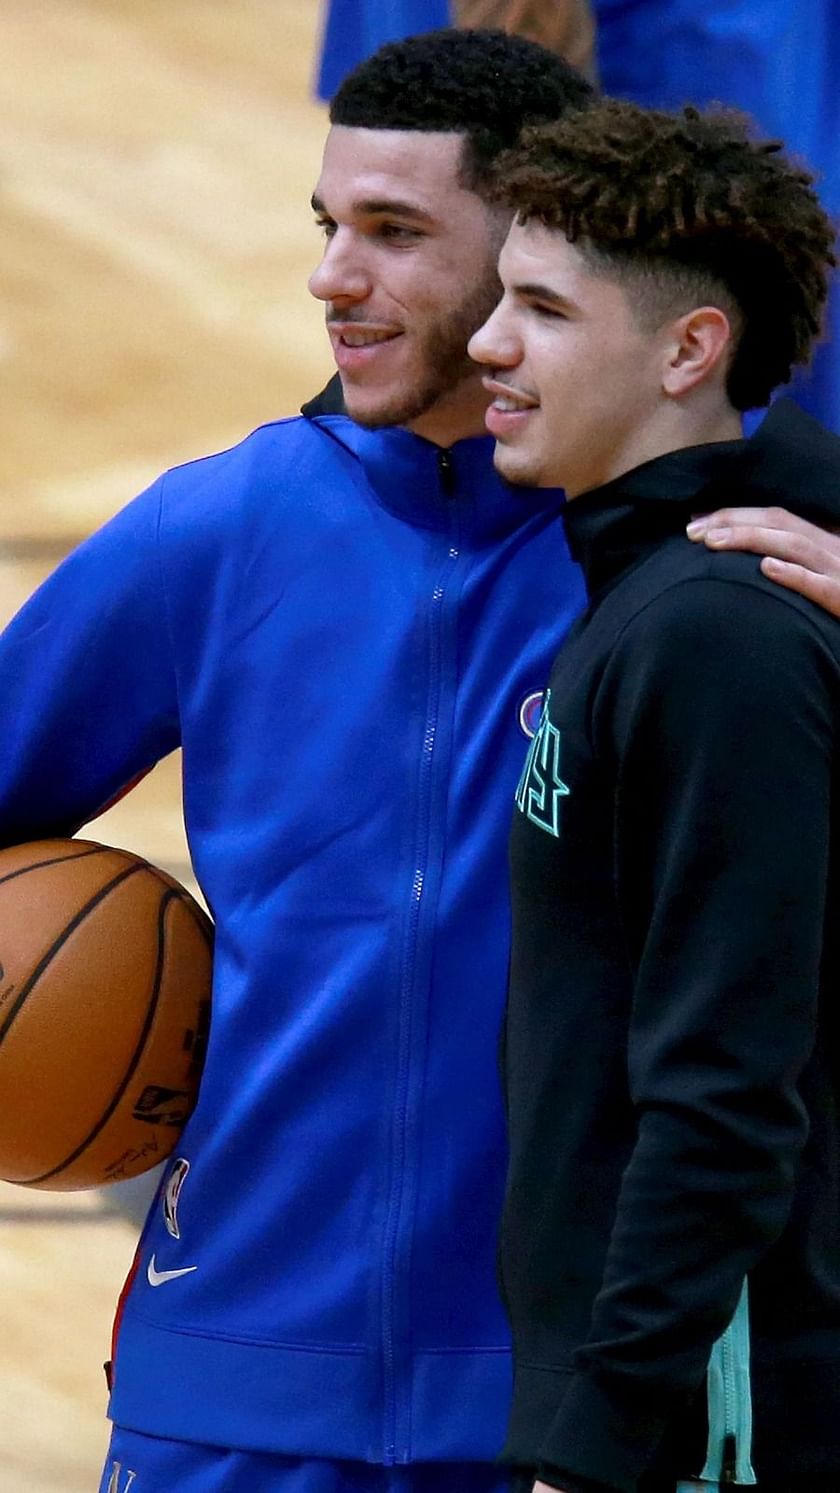 LaMelo Ball has near-triple-double, outplays brother Lonzo in